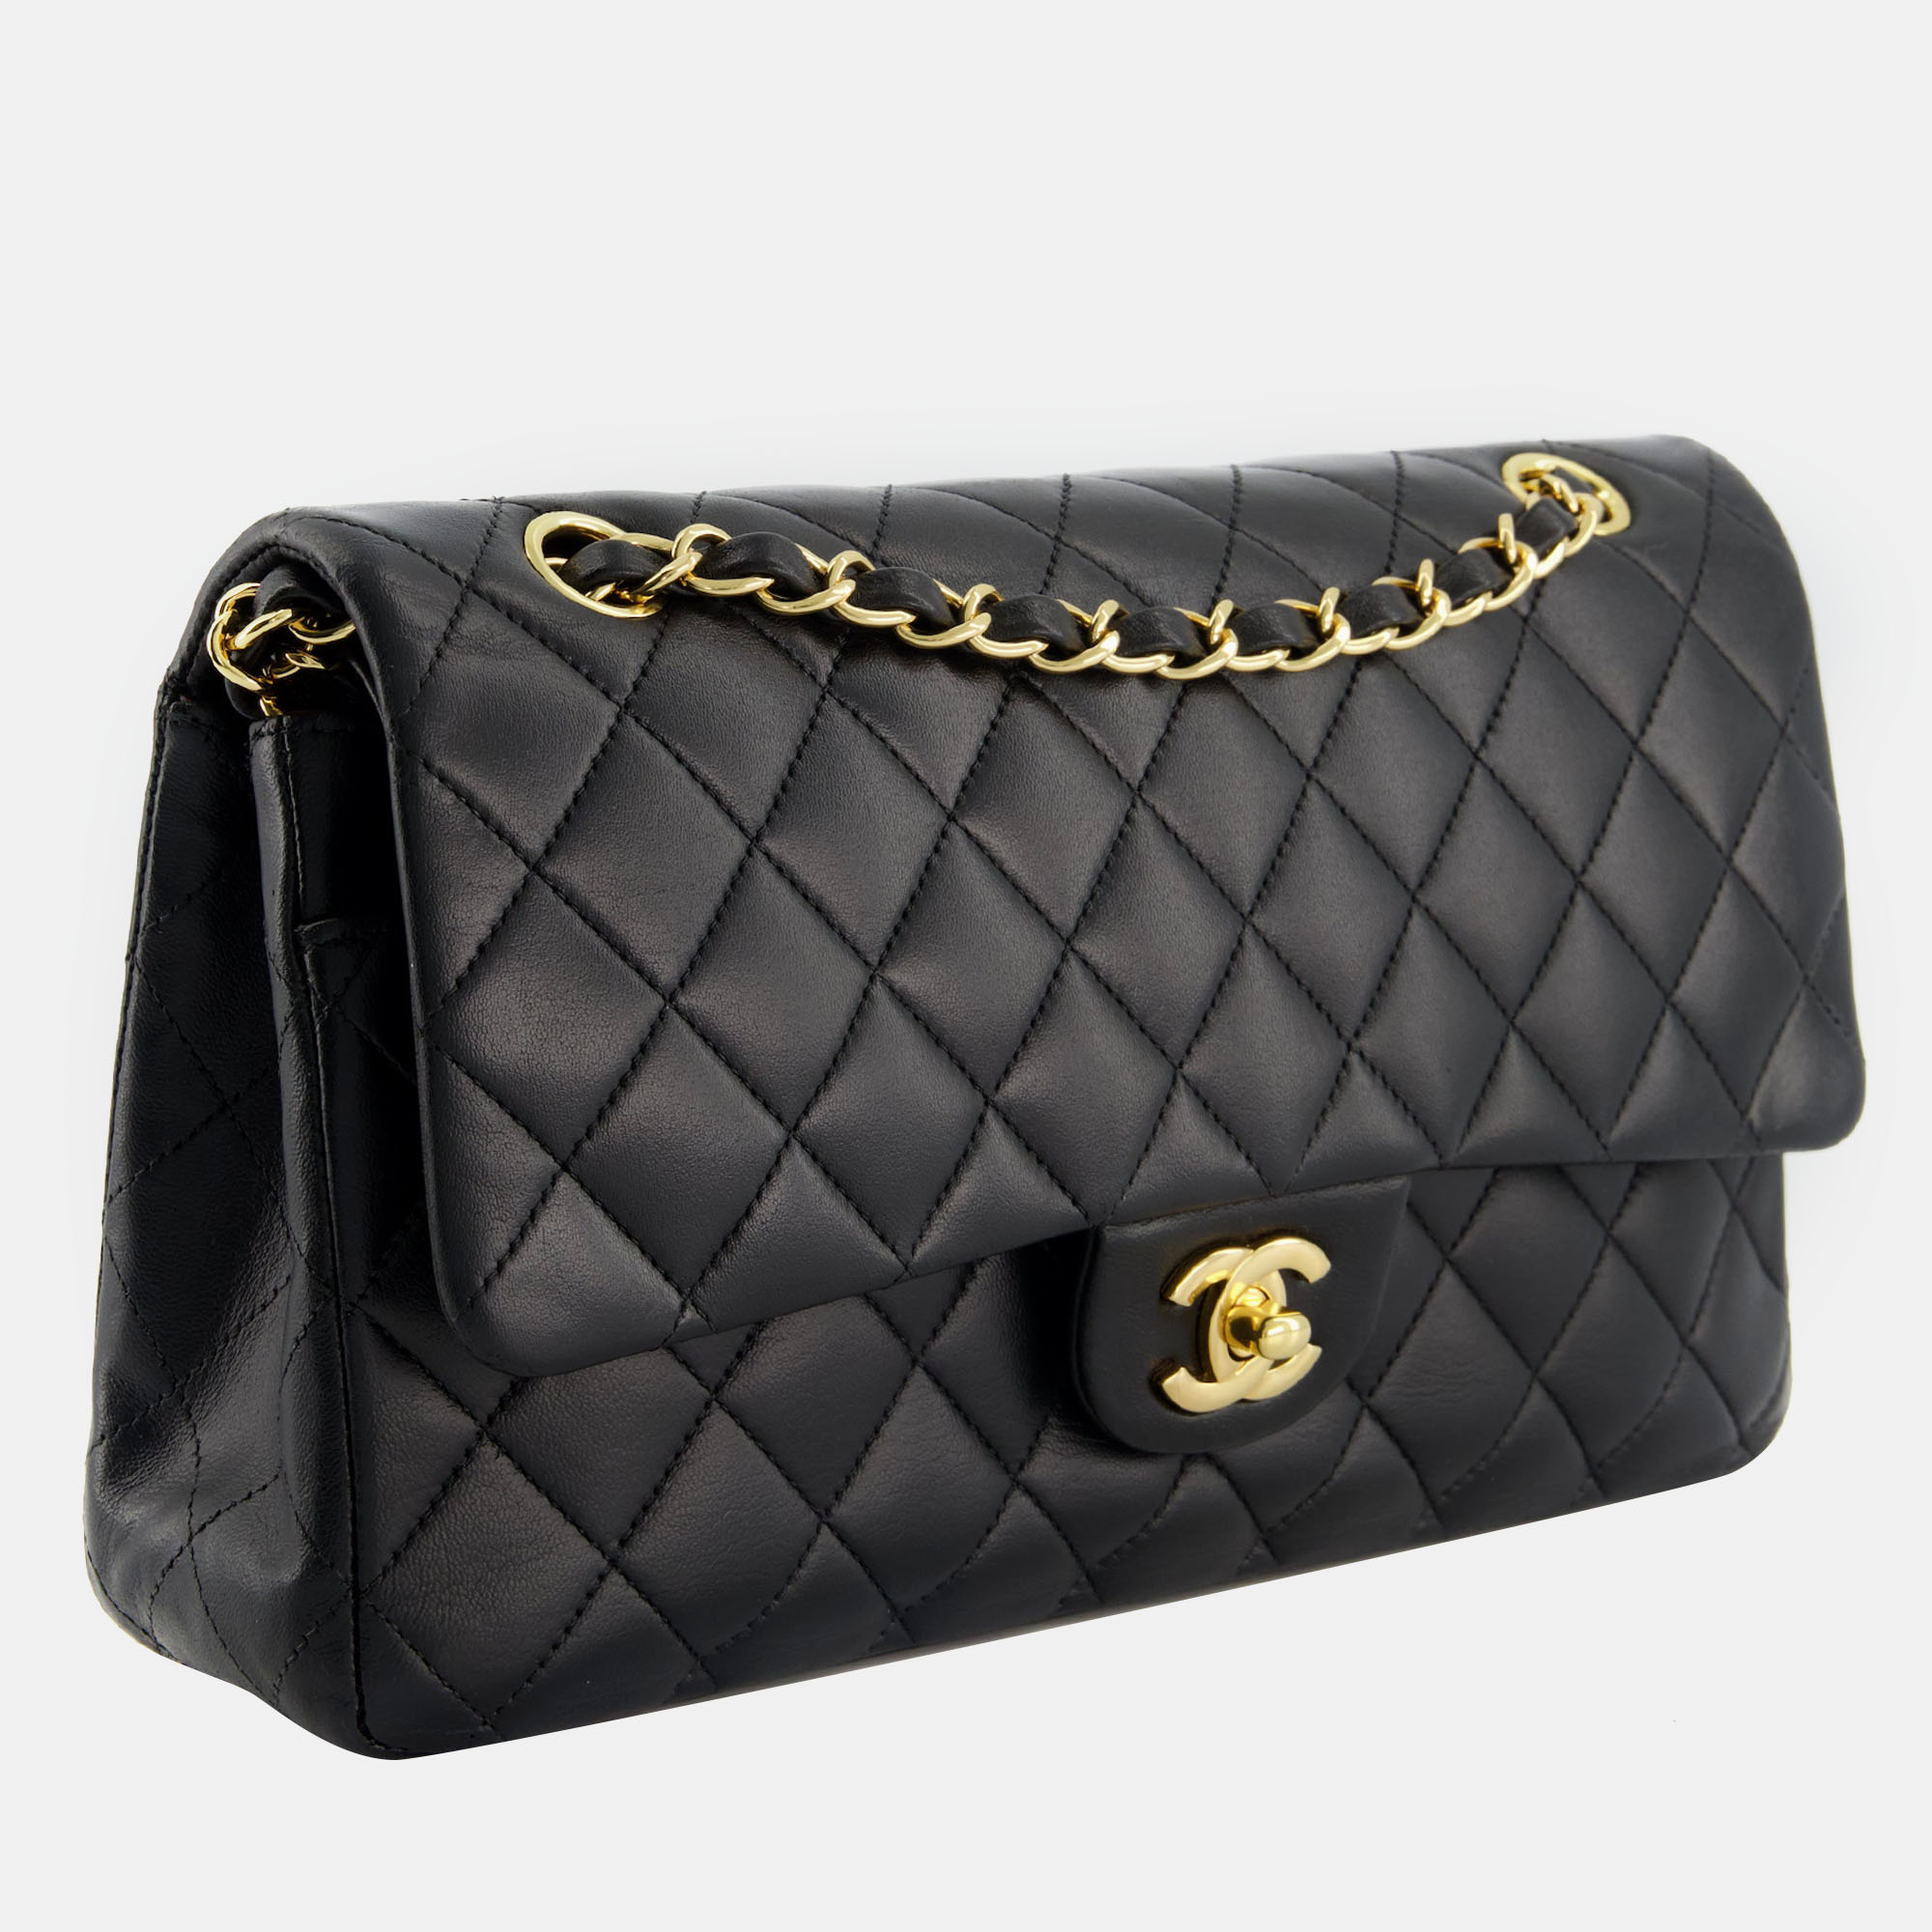 

*HOT* Chanel Medium Black Classic Double Flap in Lambskin Leather with Gold Hardware Bag RRP - Â£8,530